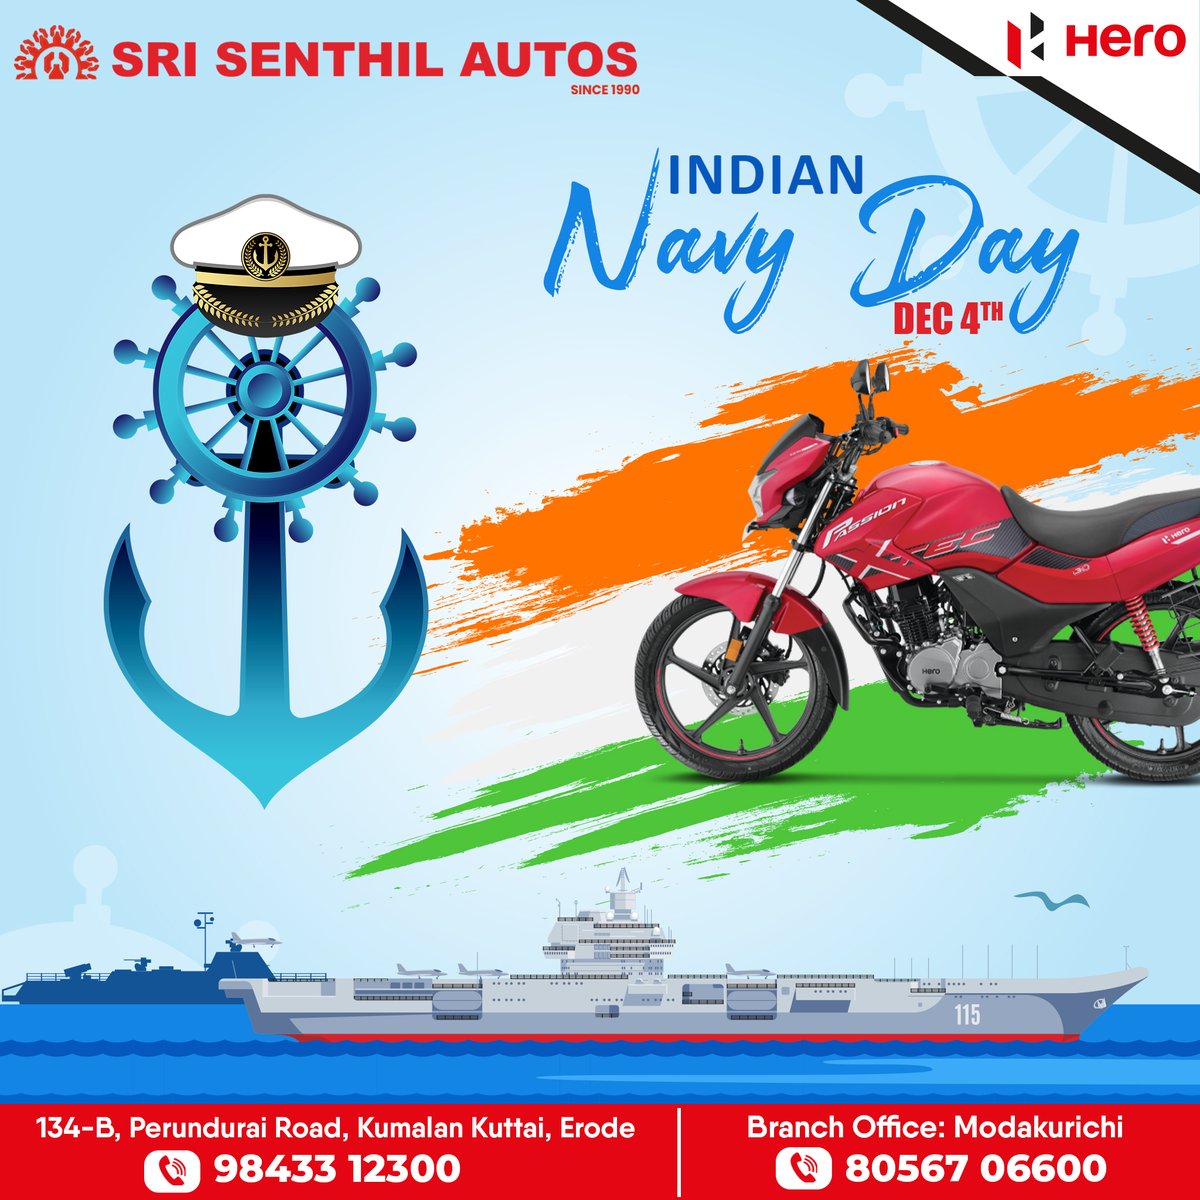 Indian Navy Day always reminds us of all our heroes who stand strong to keep us safe.

#navyday #indiannavyday #indiannavy #navy #indianarmy #navylife #indiannavyship #indiannavypride #indiannavylovers #indiannavymarcos #india #happyindiannavyday #motorcycle #srisenthilautos